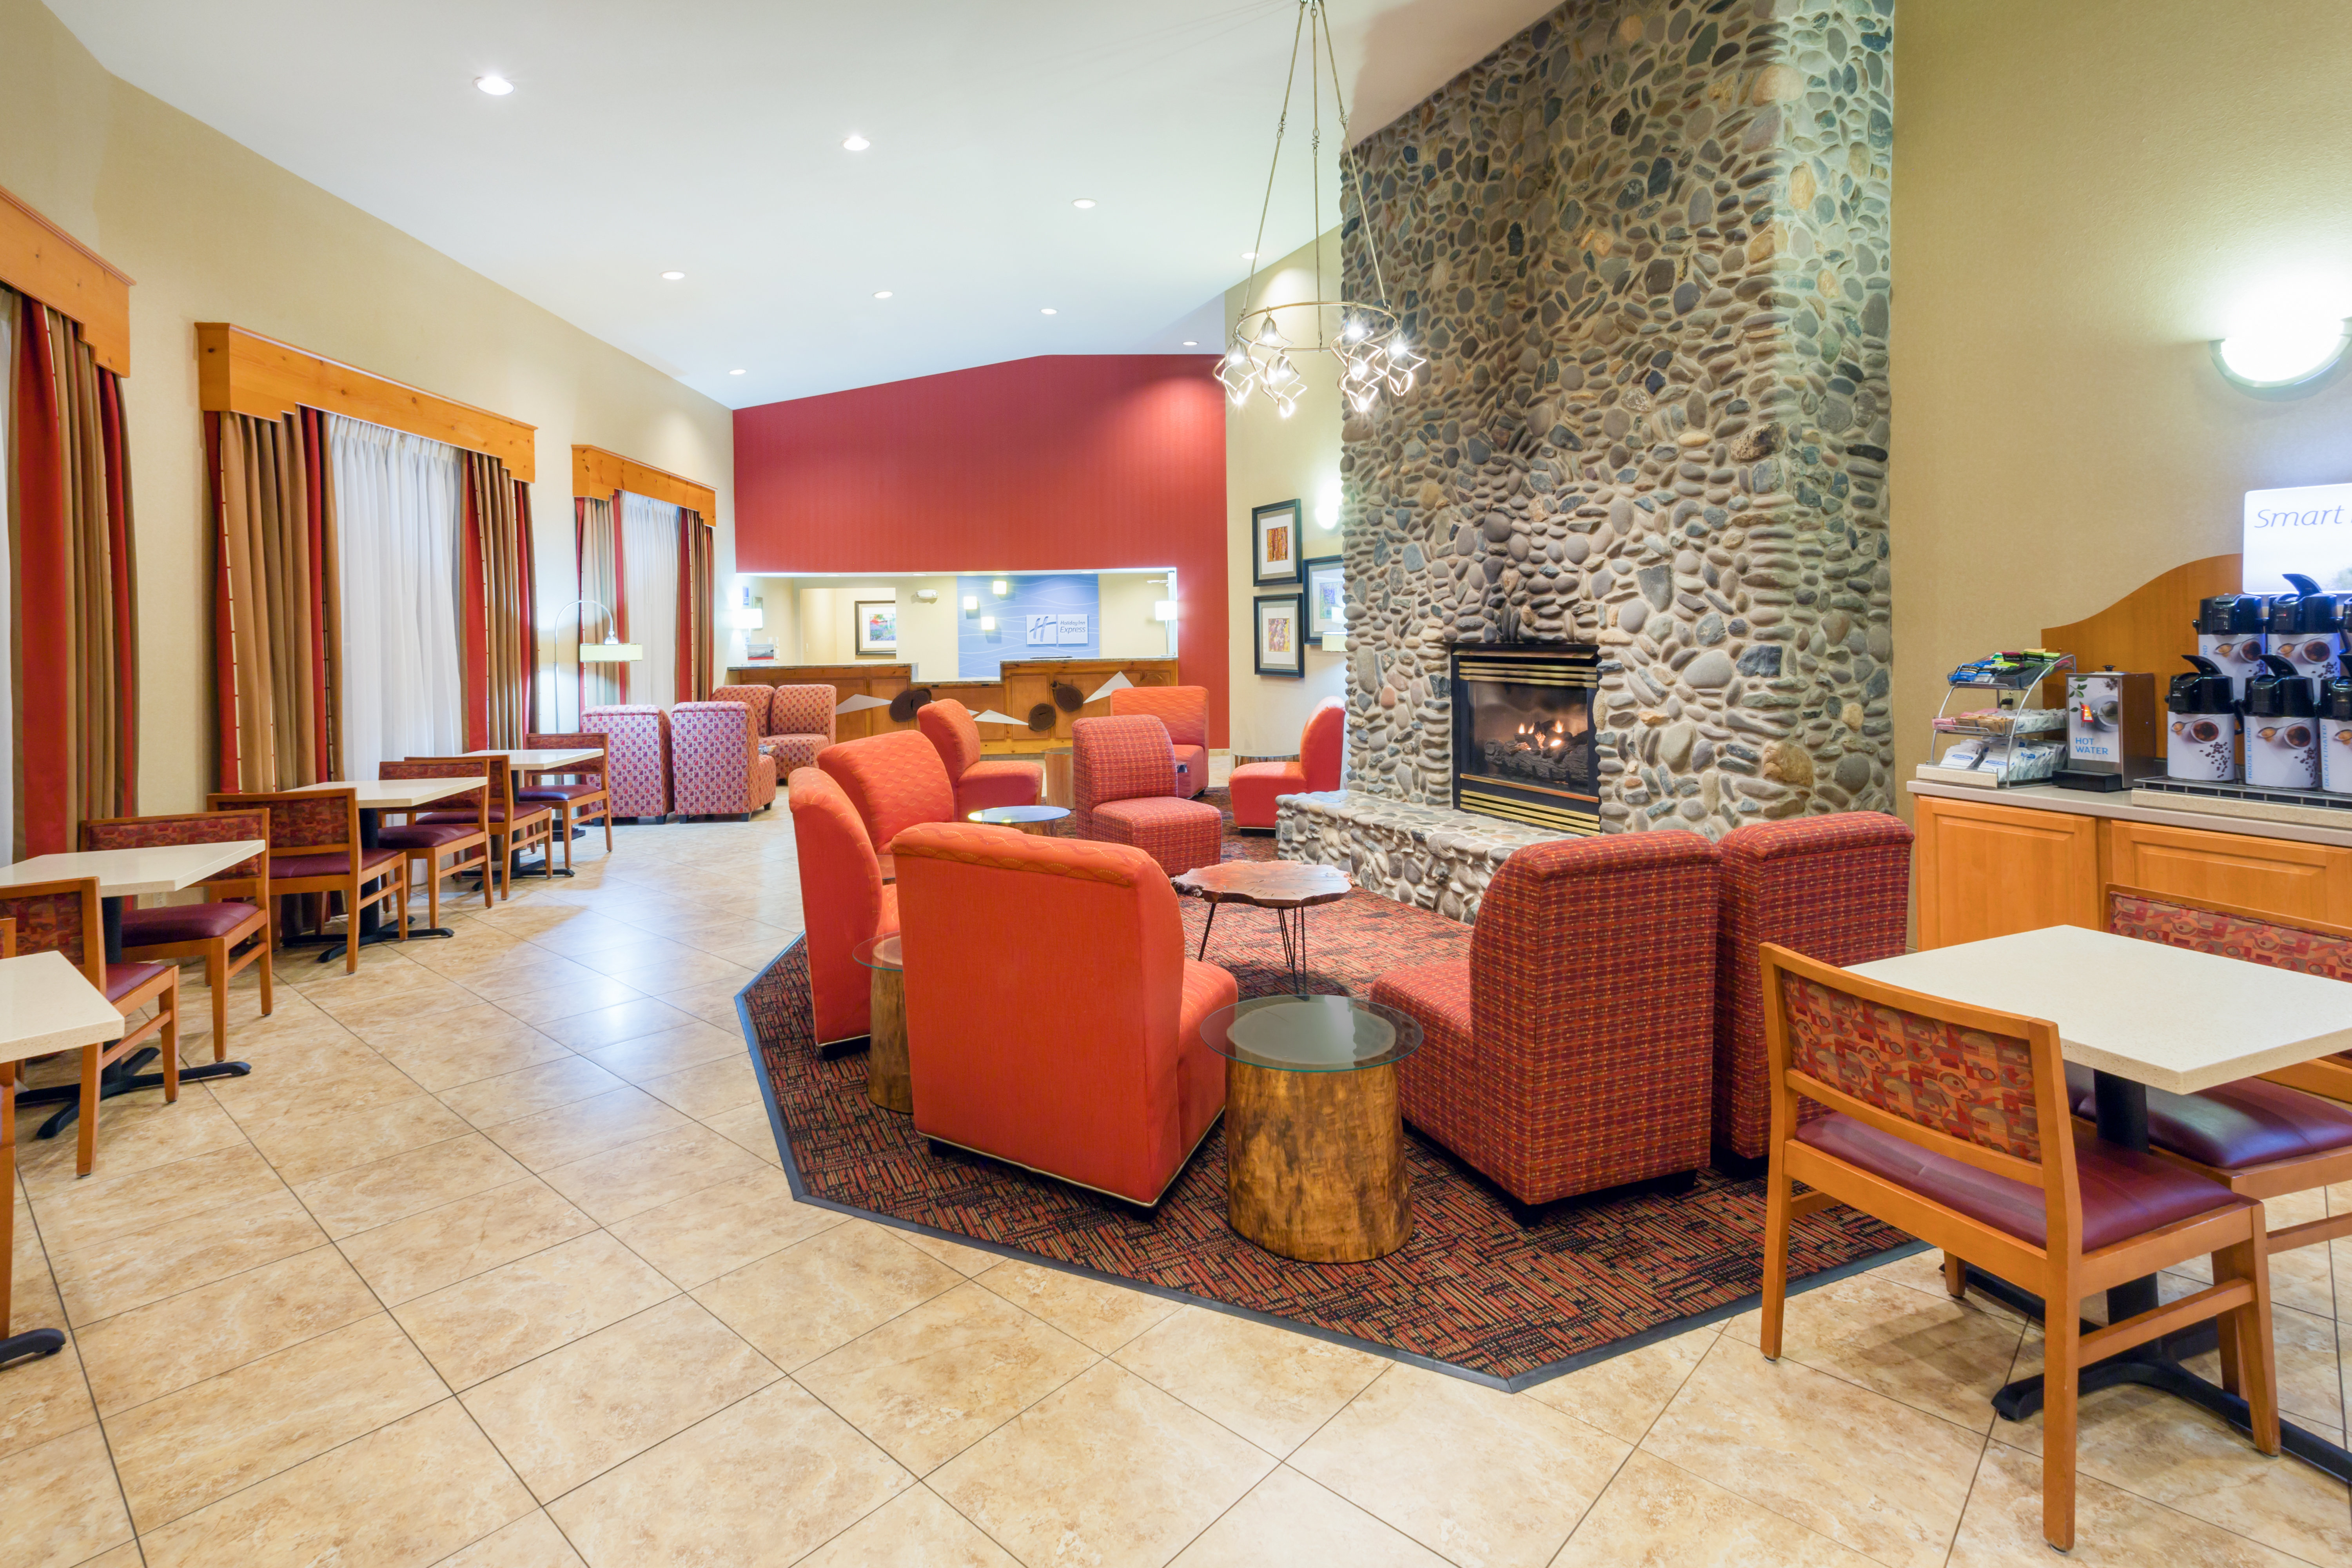 Hotel Lobby and Reception Desk Await Your Arrival